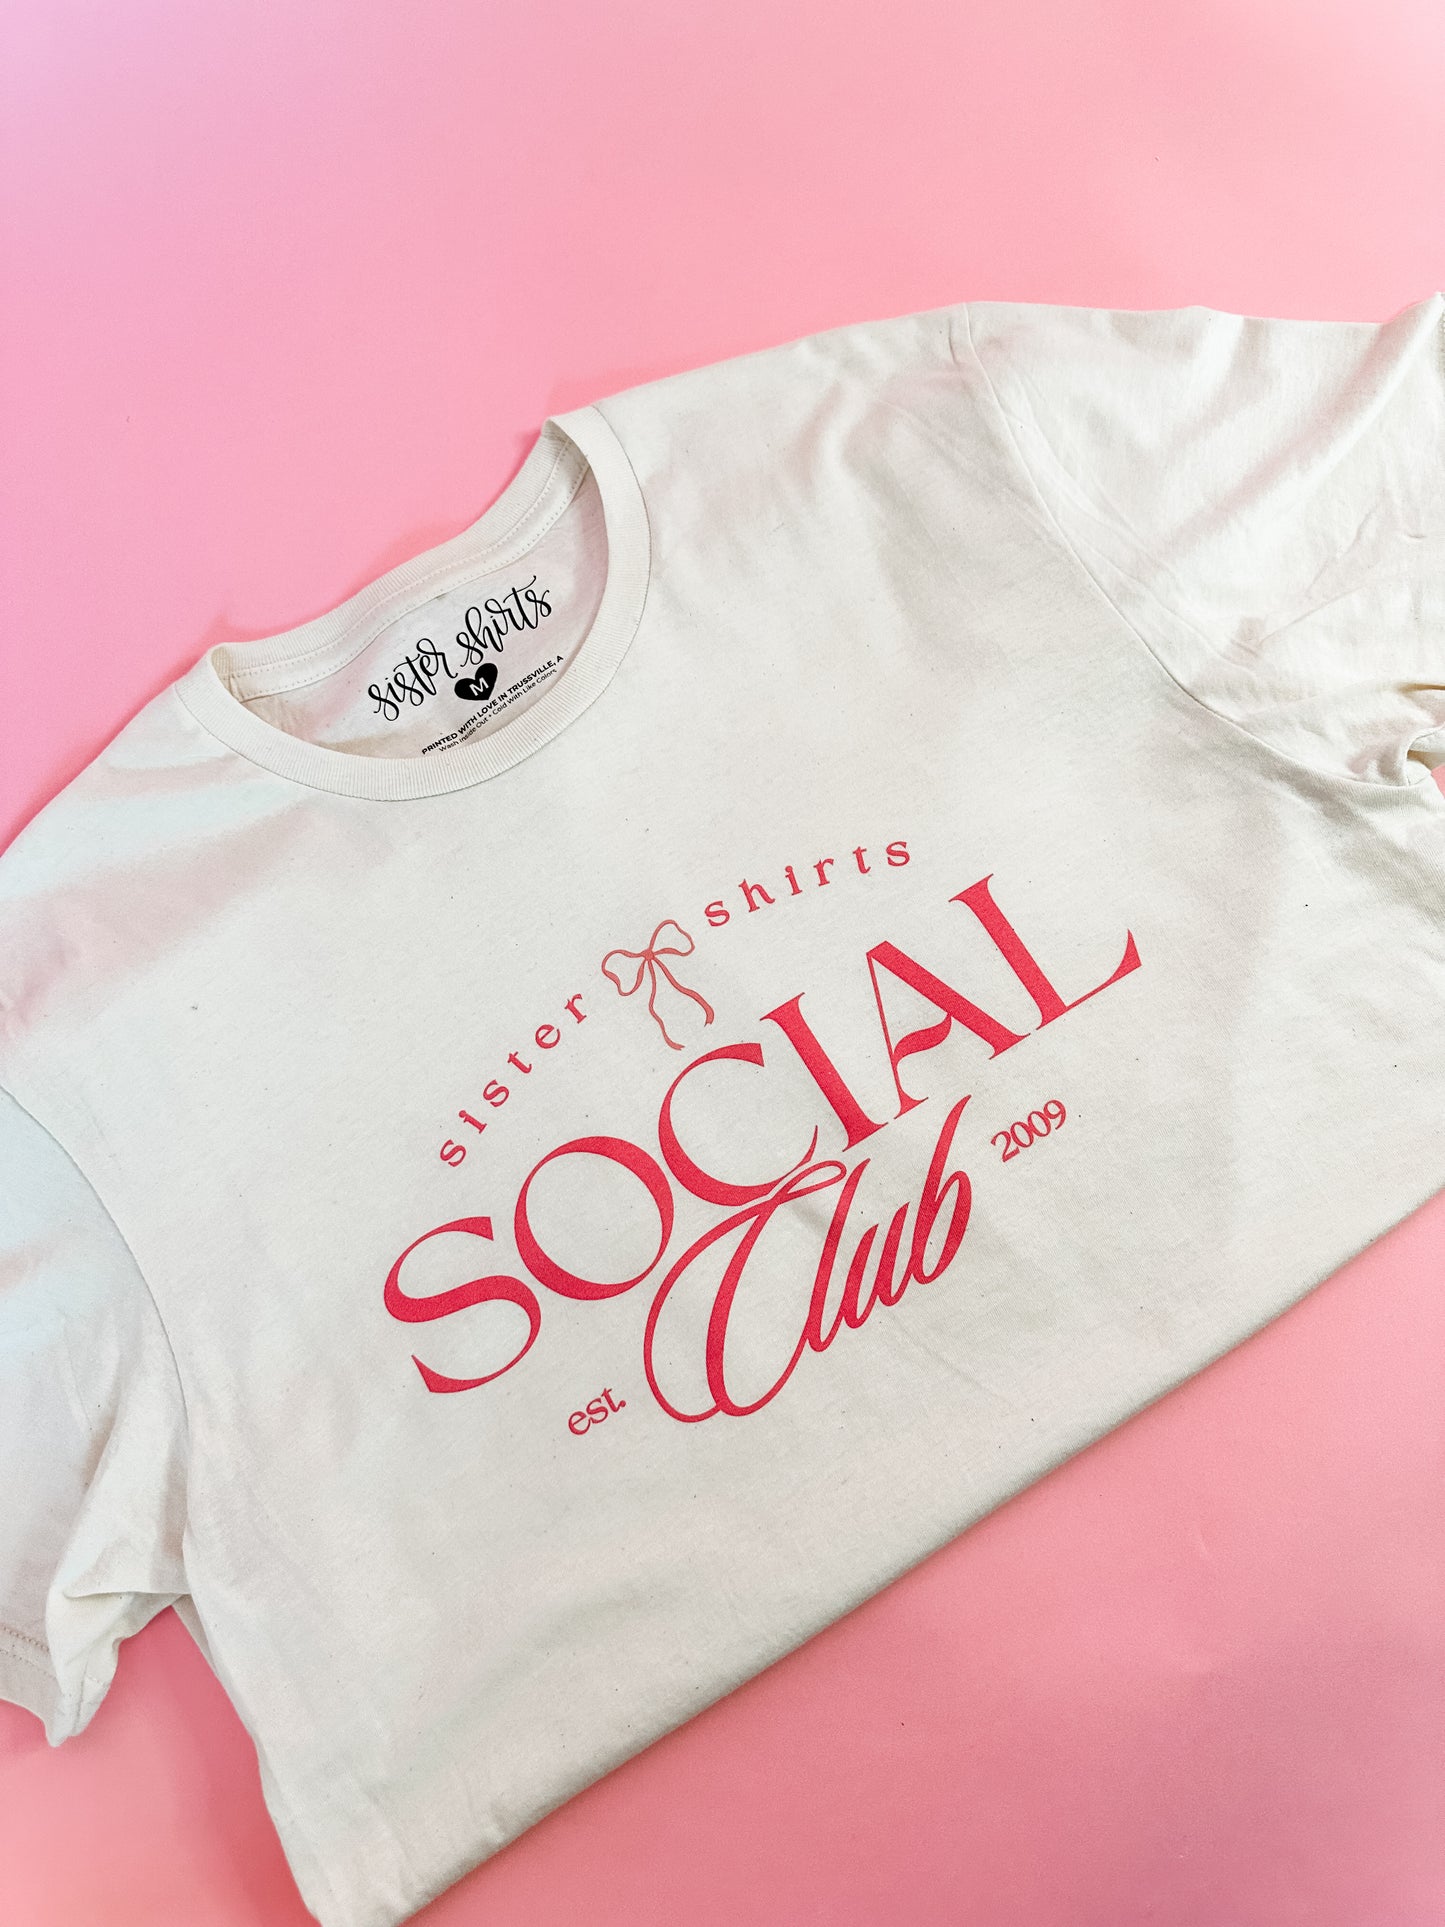 Sister Shirts Social Club | Adult Tee-Adult Tee-Sister Shirts-Sister Shirts, Cute & Custom Tees for Mama & Littles in Trussville, Alabama.